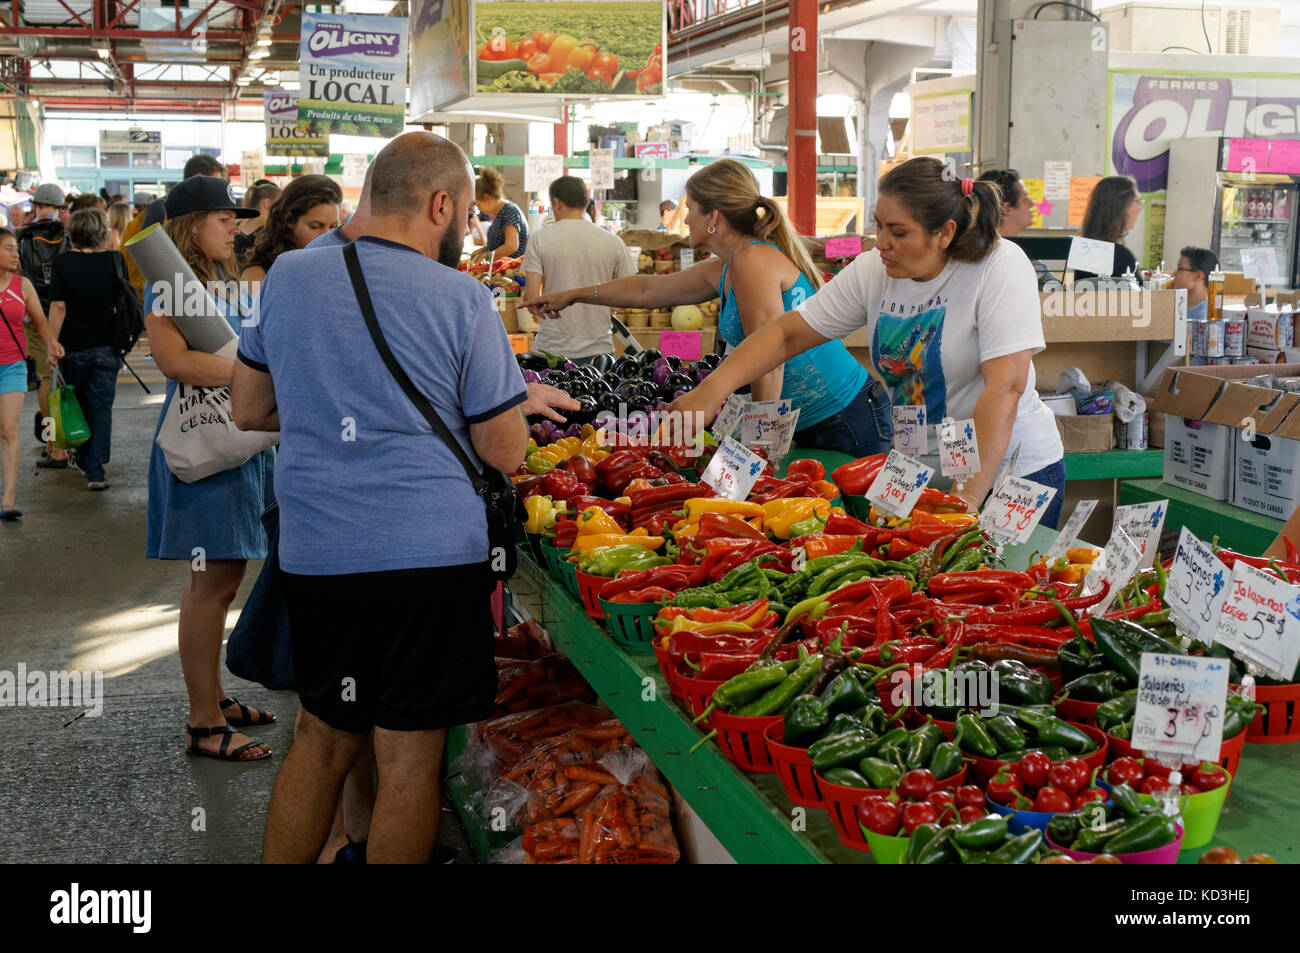 People shopping at a vegetable vendor's stall in Jean Talon public market or Marche Jean Talon, Montreal, Quebec, Canada Stock Photo